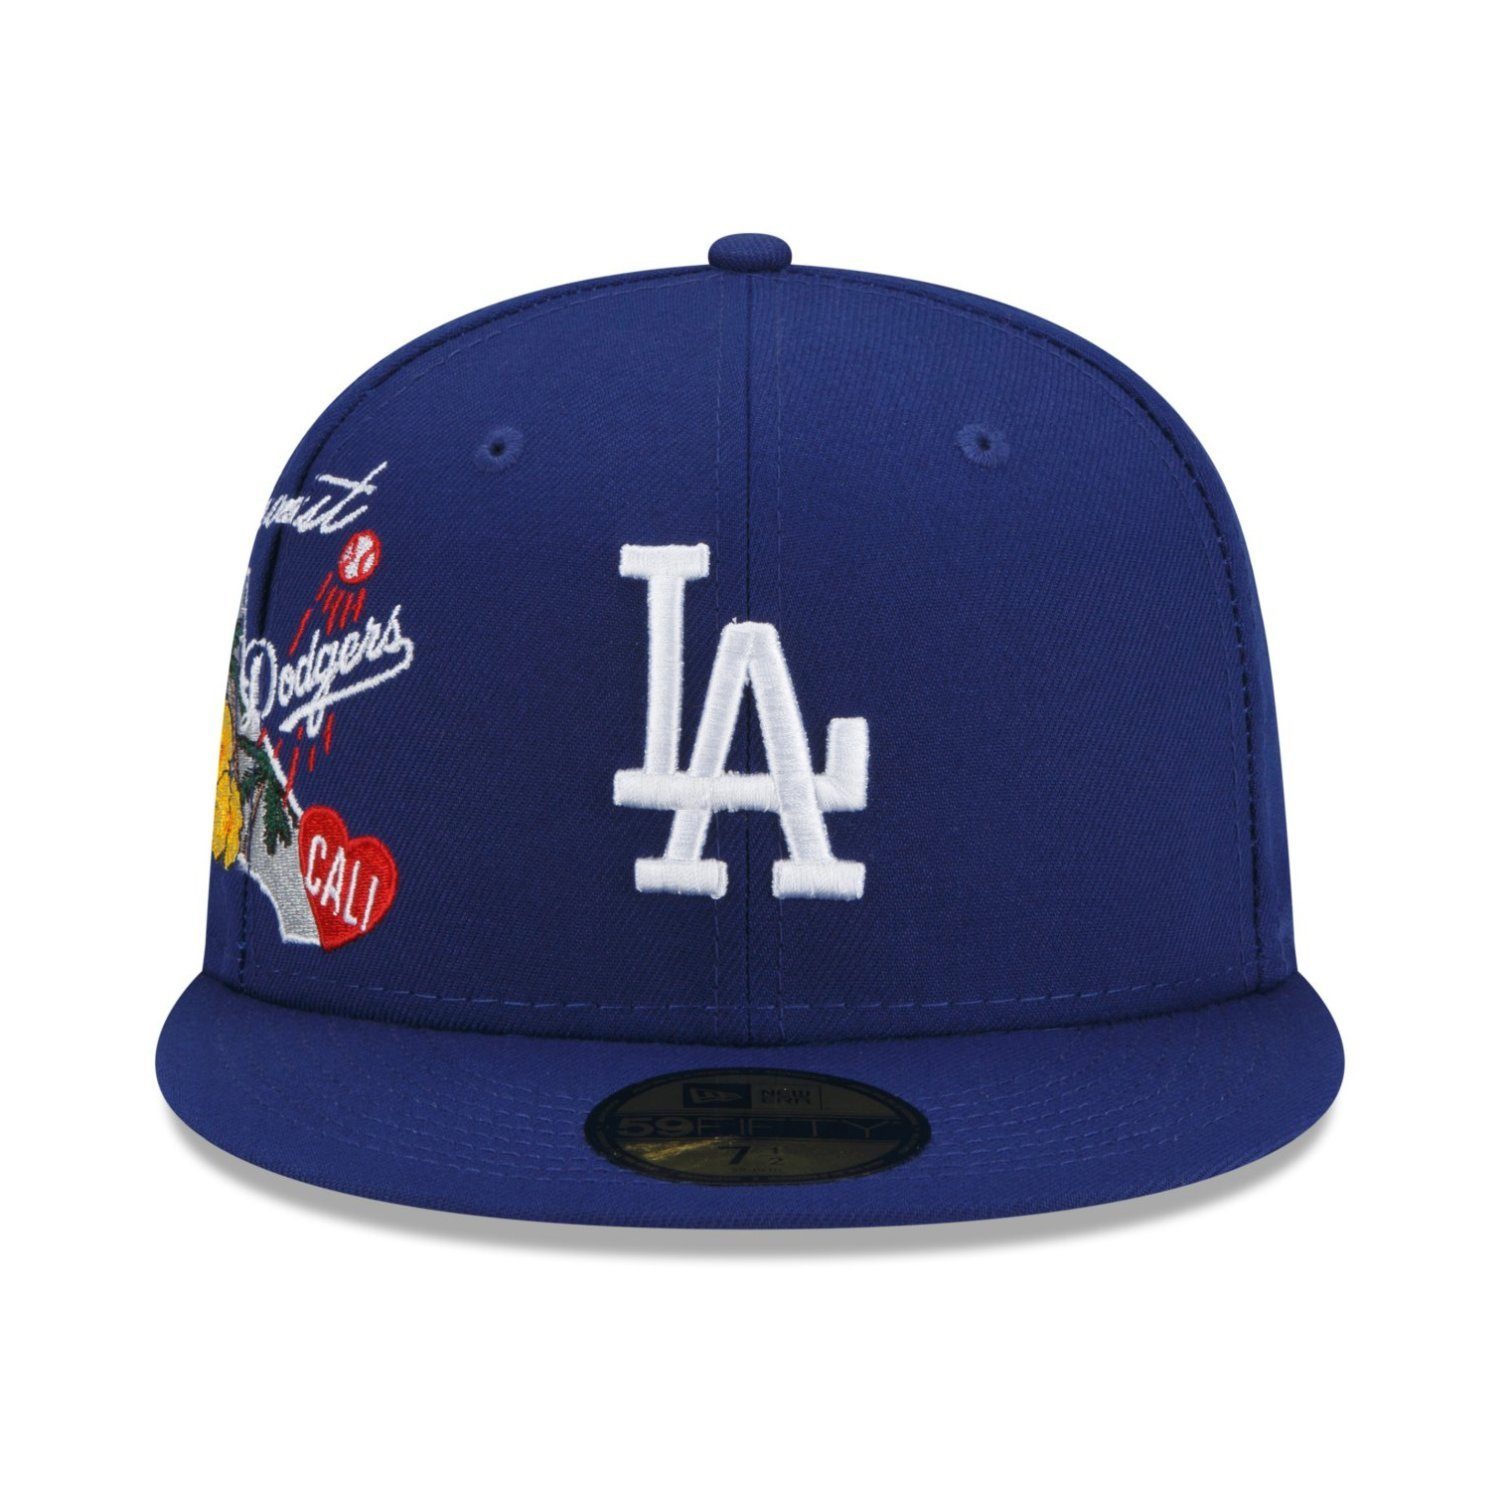 New Era Fitted Cap 59Fifty Angeles CLUSTER Los Dodgers CITY